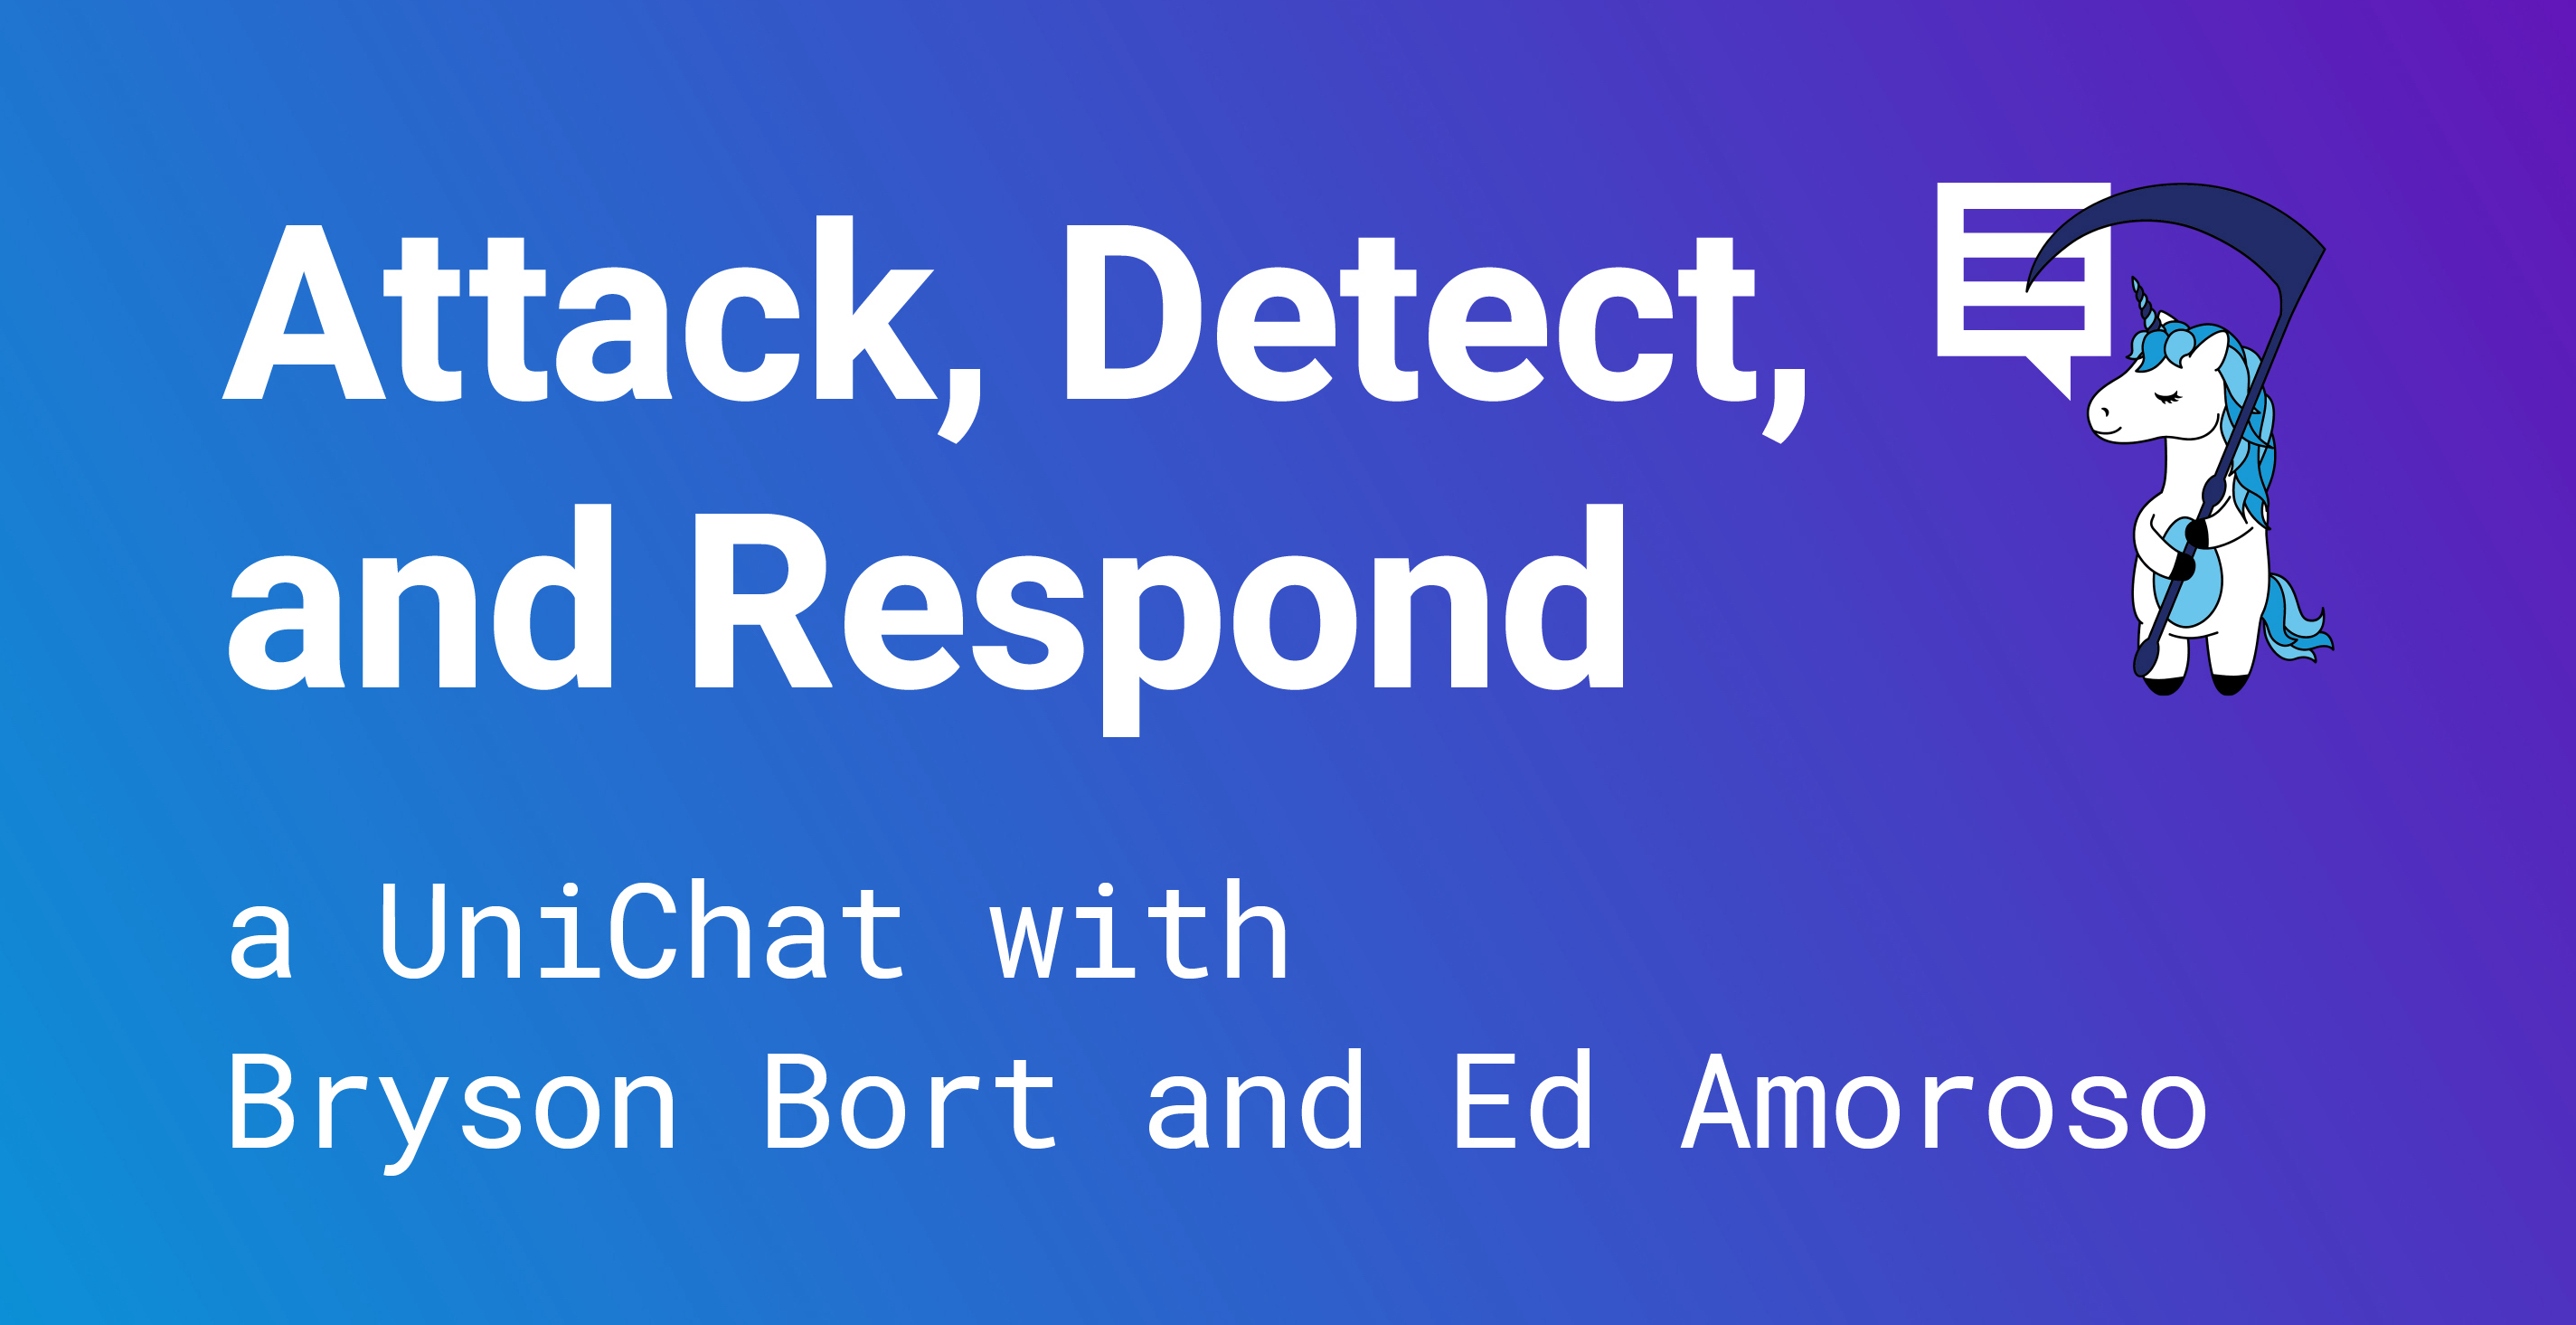 Attack, Detect, and Respond a UniChat with Ed Amoroso and Bryson Bort